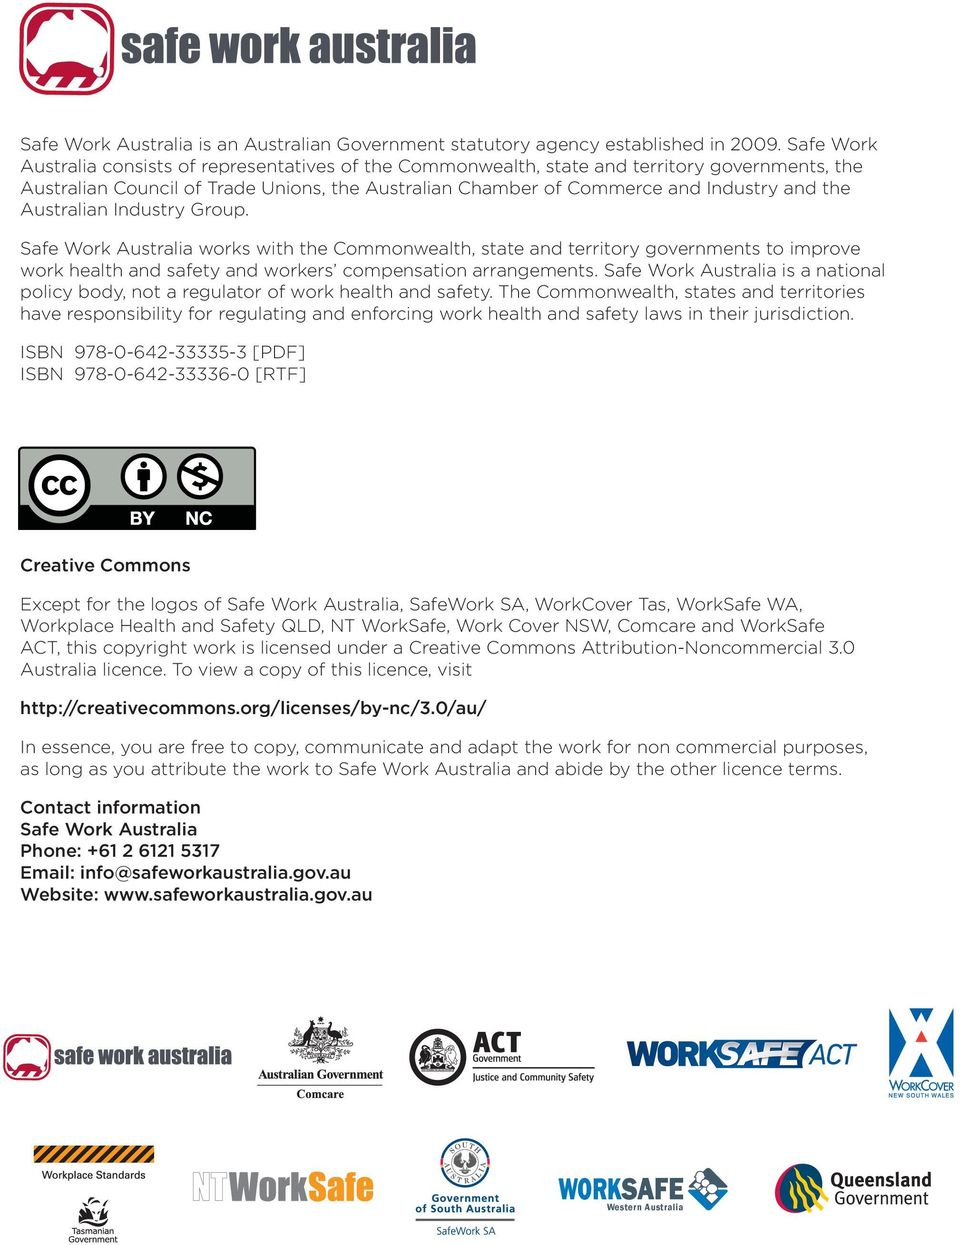 Australian Industry Group. Safe Work Australia works with the Commonwealth, state and territory governments to improve work health and safety and workers compensation arrangements.